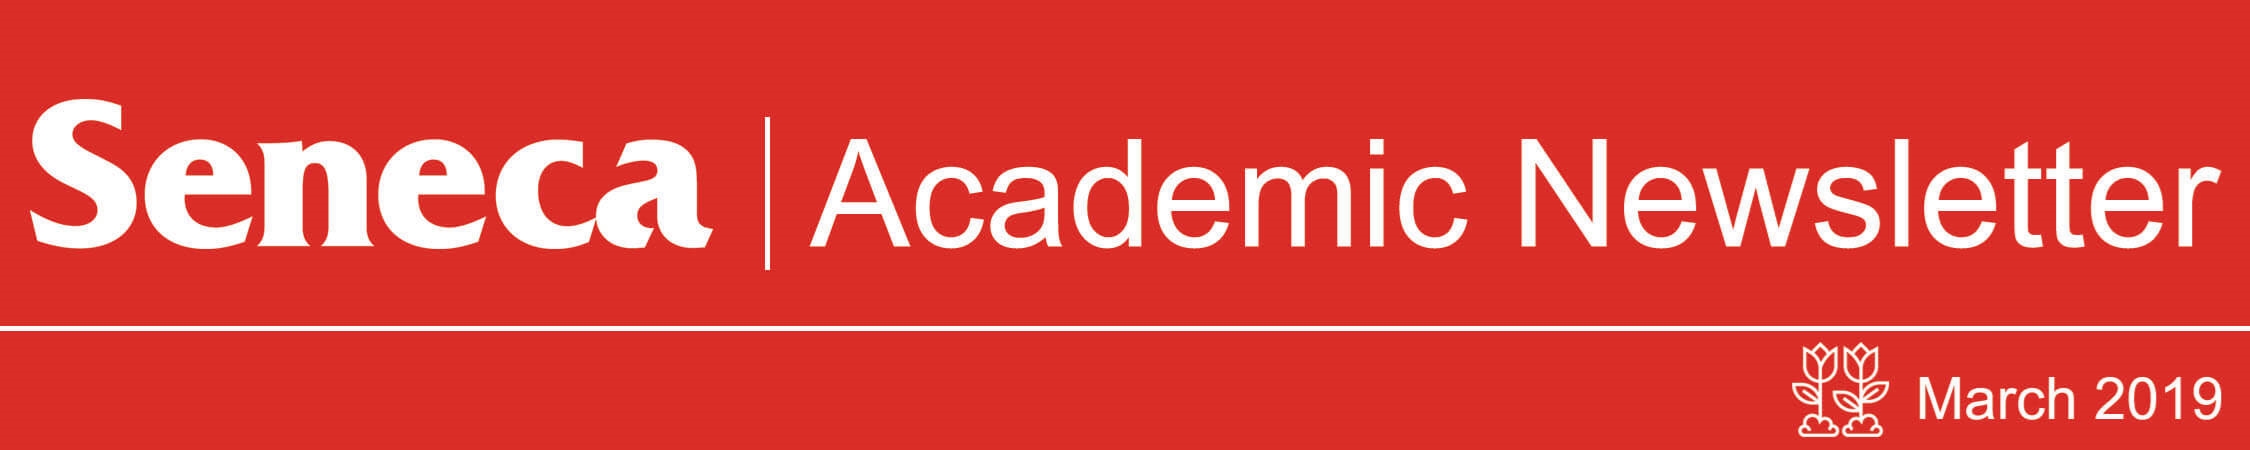 The header logo for the March 2019 issue of the Academic Newsletter